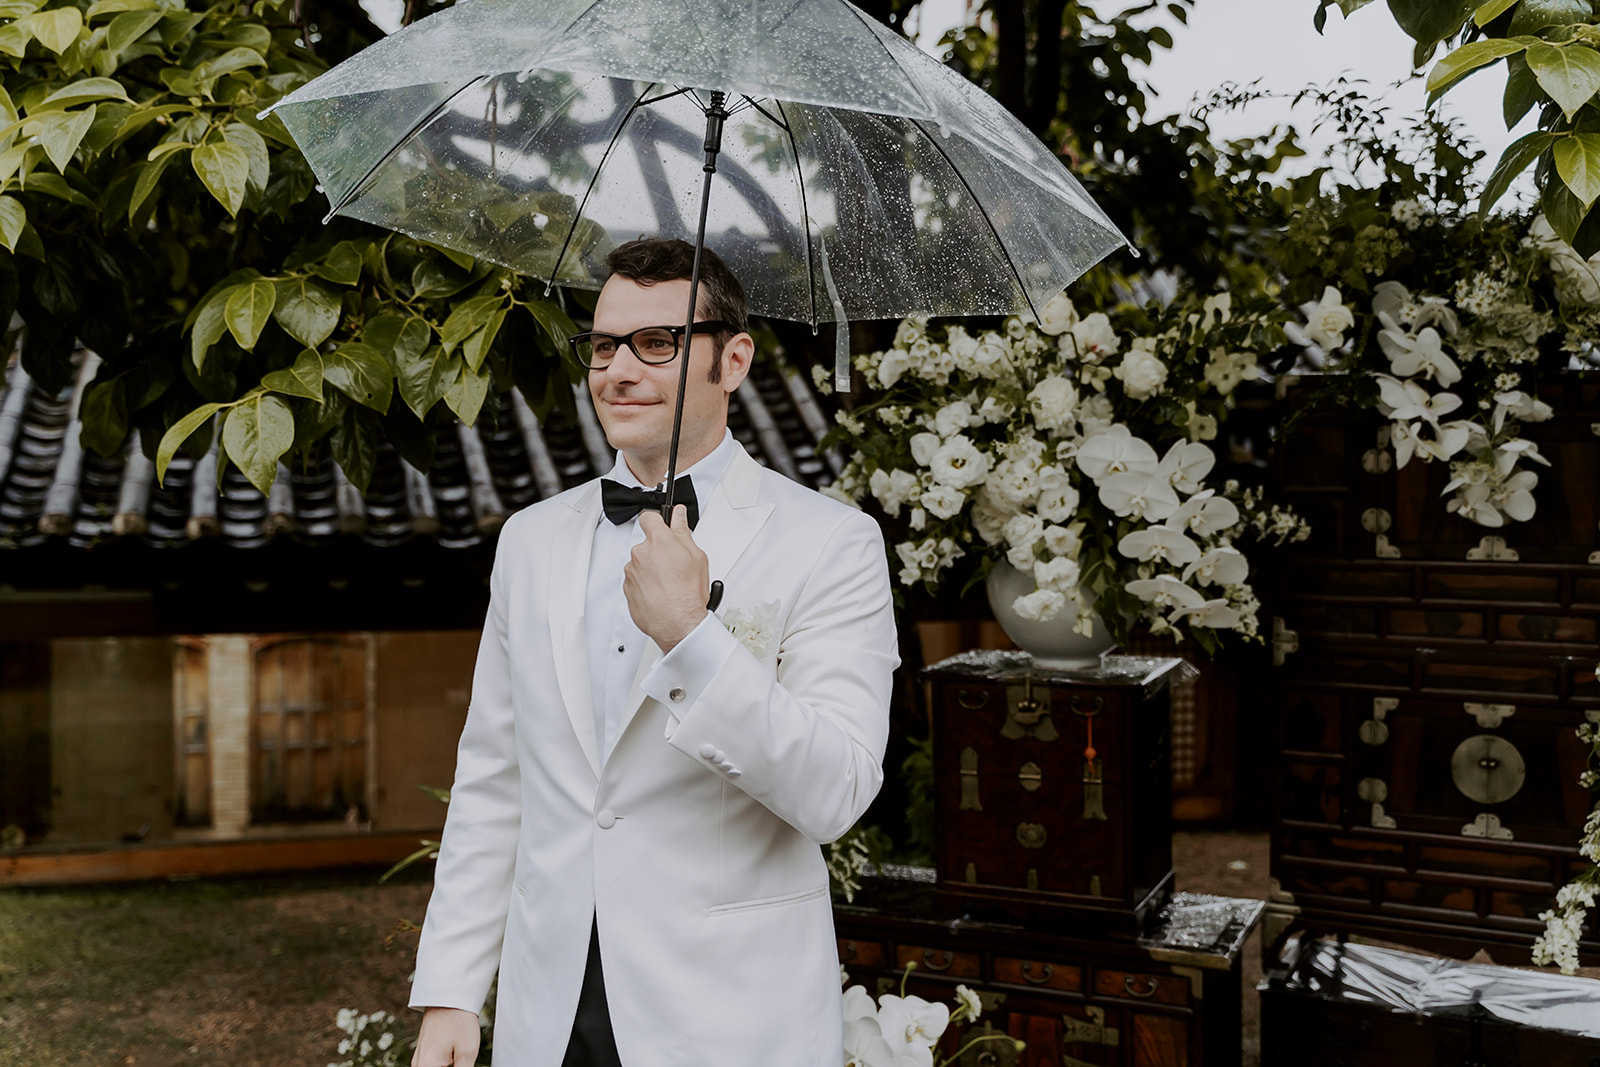 The groom waiting for the bride standing and holding an umbrella. 